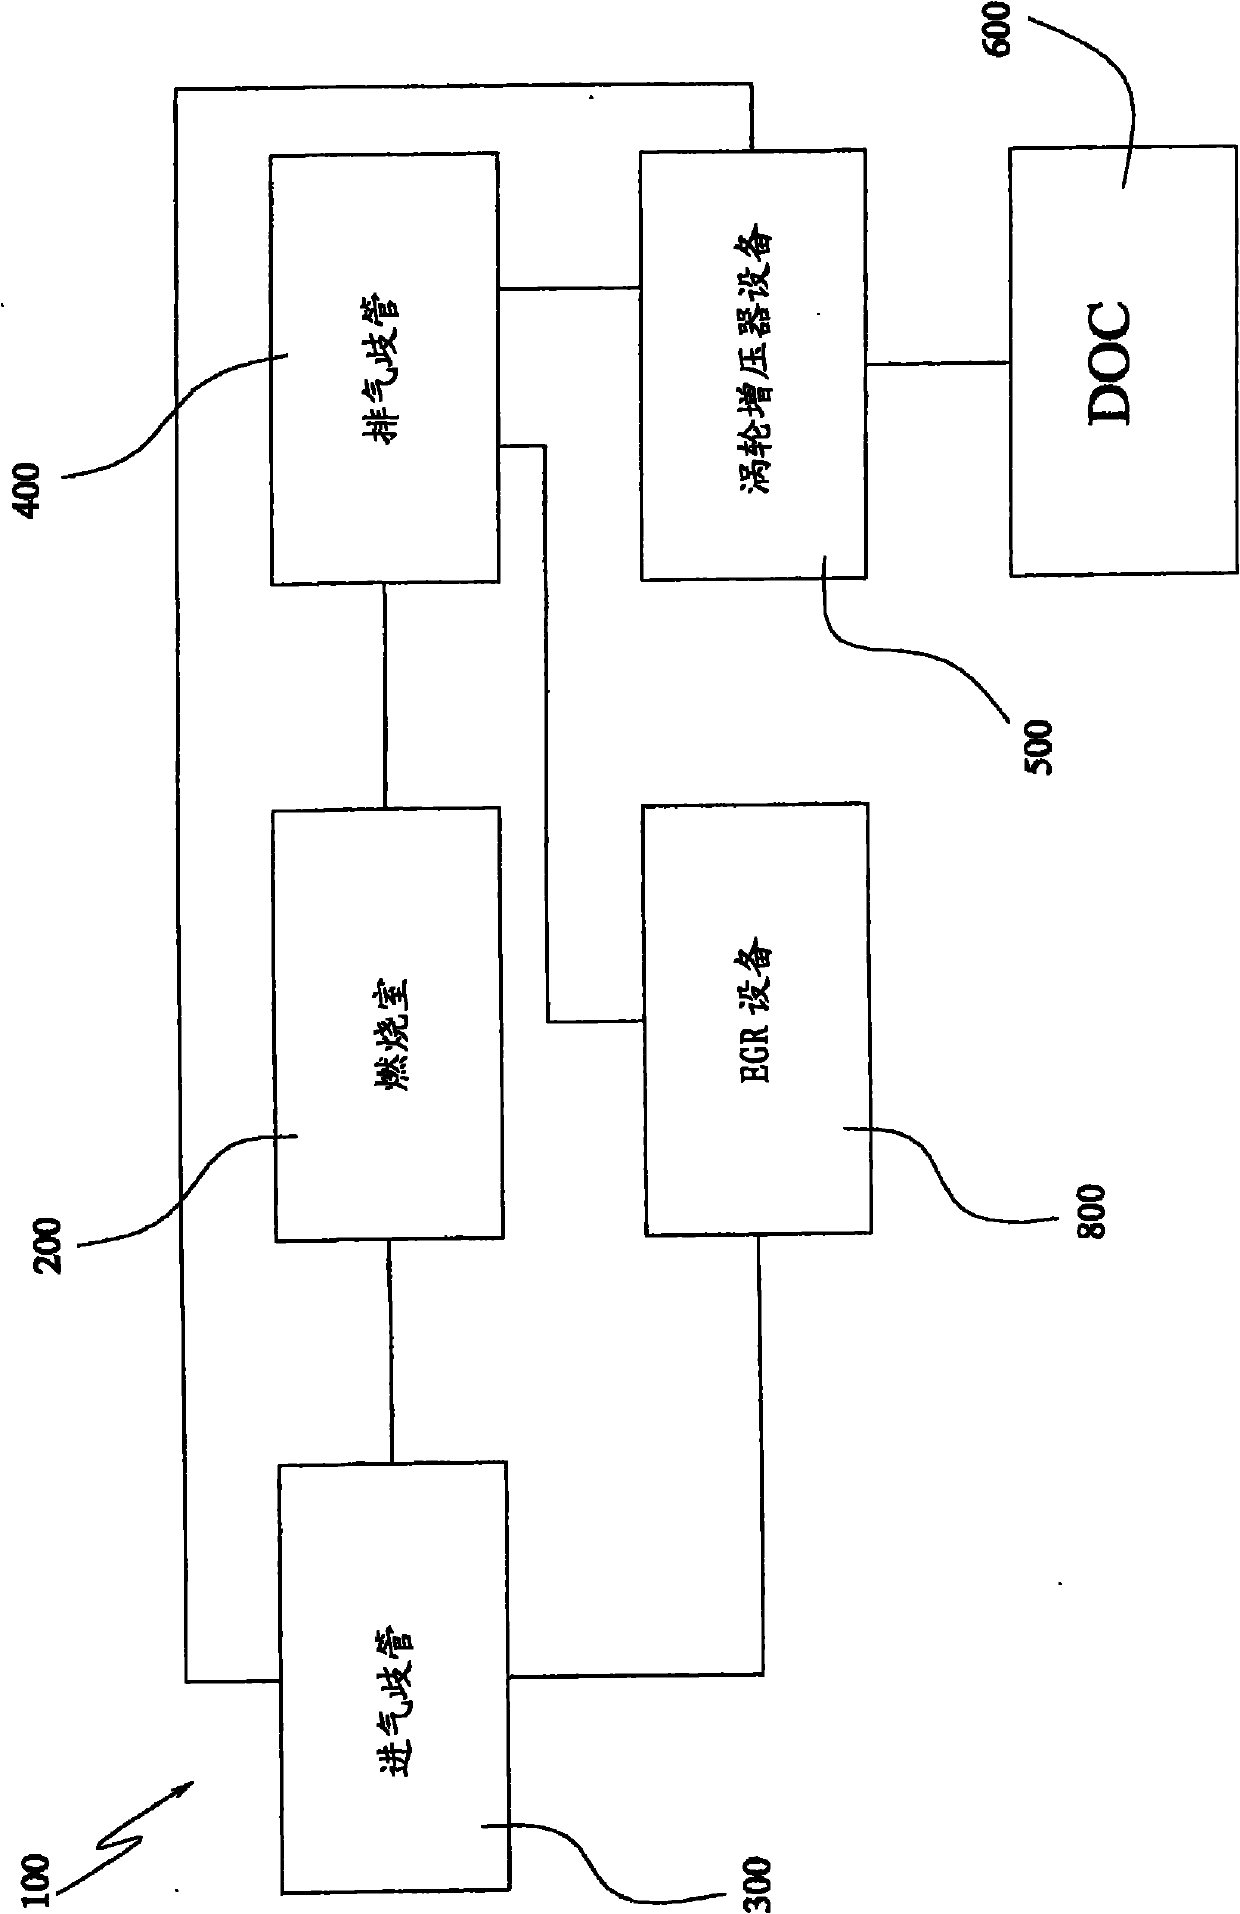 Method for estimating oxygen concentration downstream of diesel oxidation catalyst